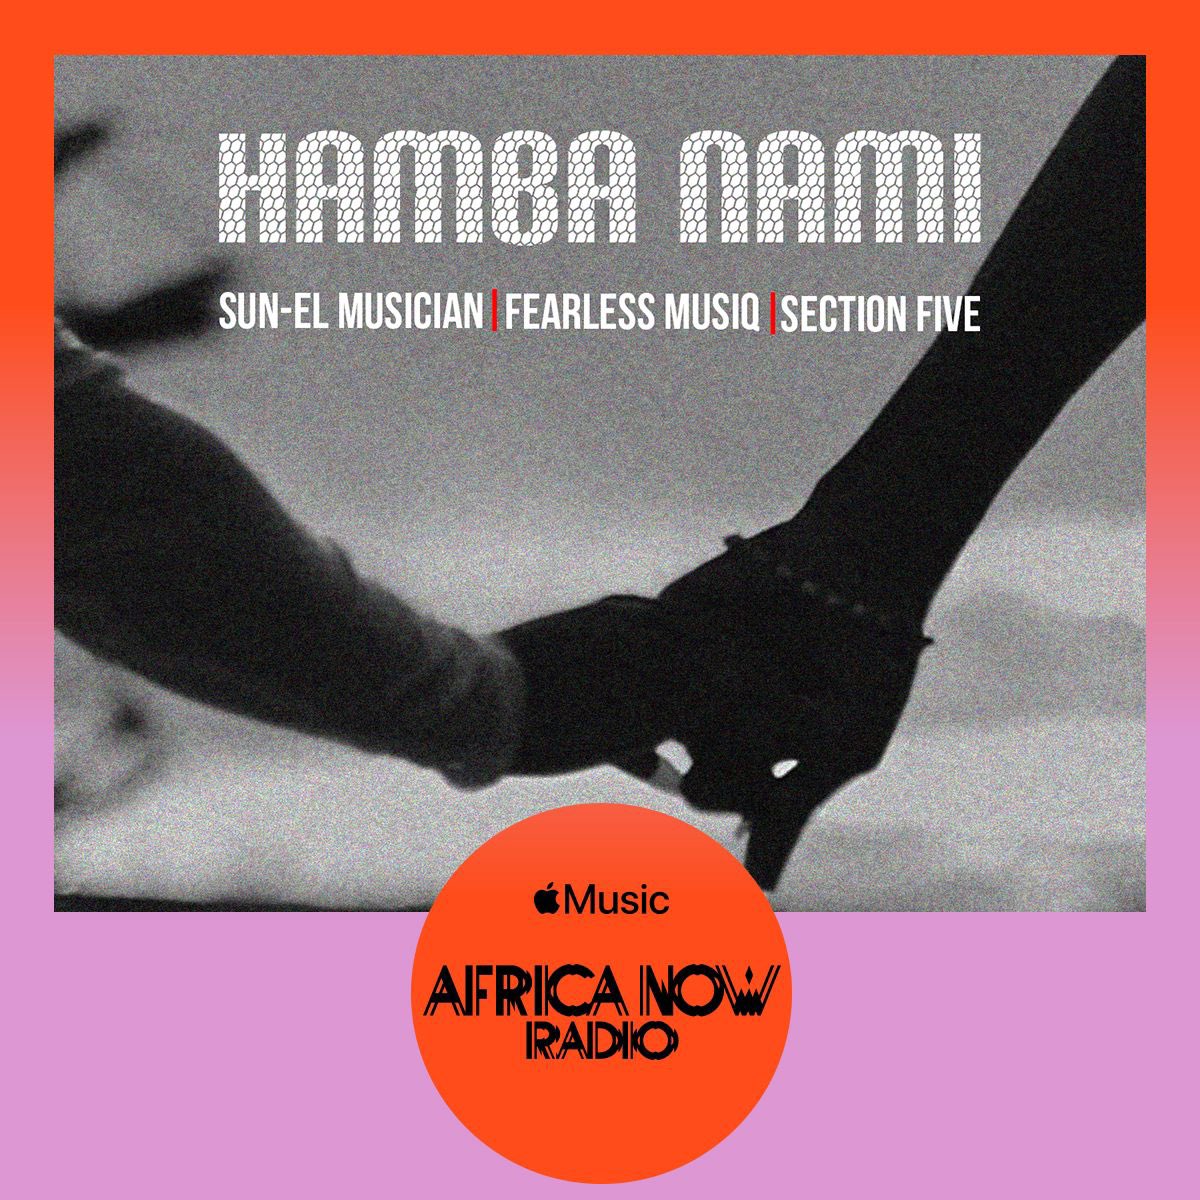 Catch my brand new single on the ‘Big 5’ on Africa Now Radio with @Nandi_Madida this Friday 29 March at 9am Accra 10am Lagos 11am Johannesburg on Apple Music 1! ✨✨ #HambaNami #UnderTheSun